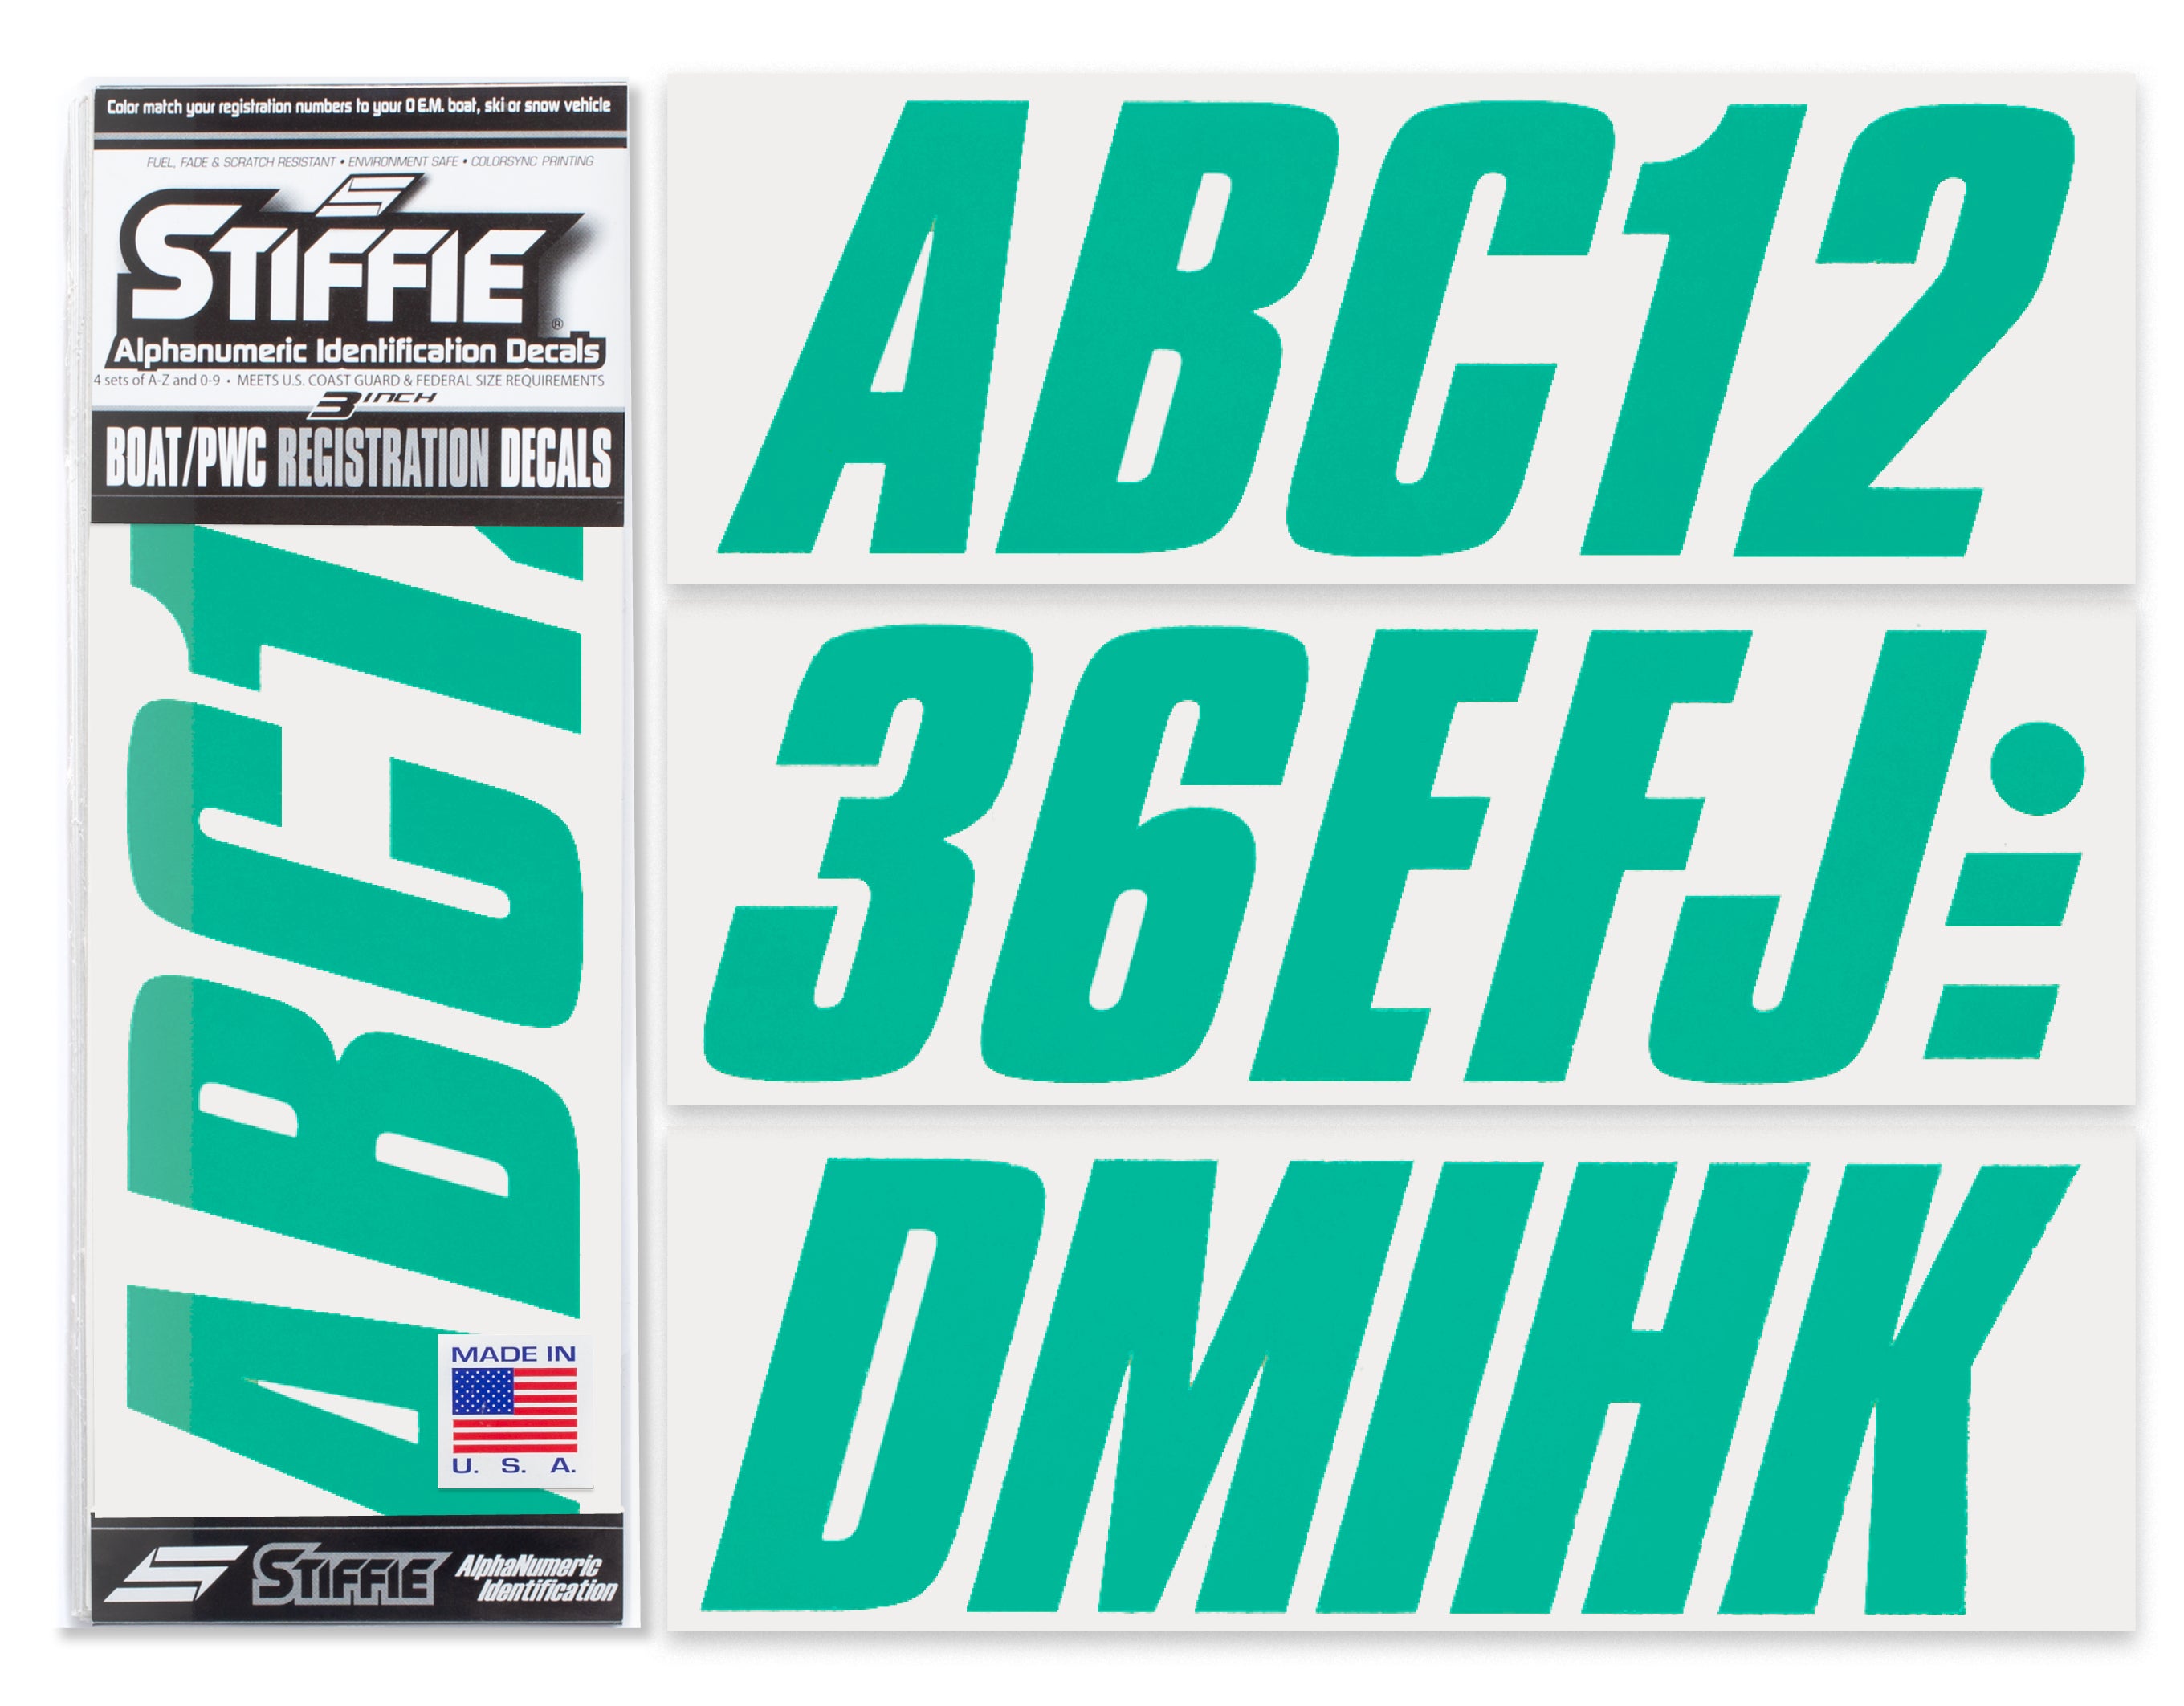 STIFFIE Shift Sea Teal 3" ID Kit Alpha-Numeric Registration Identification Numbers Stickers Decals for Boats & Personal Watercraft